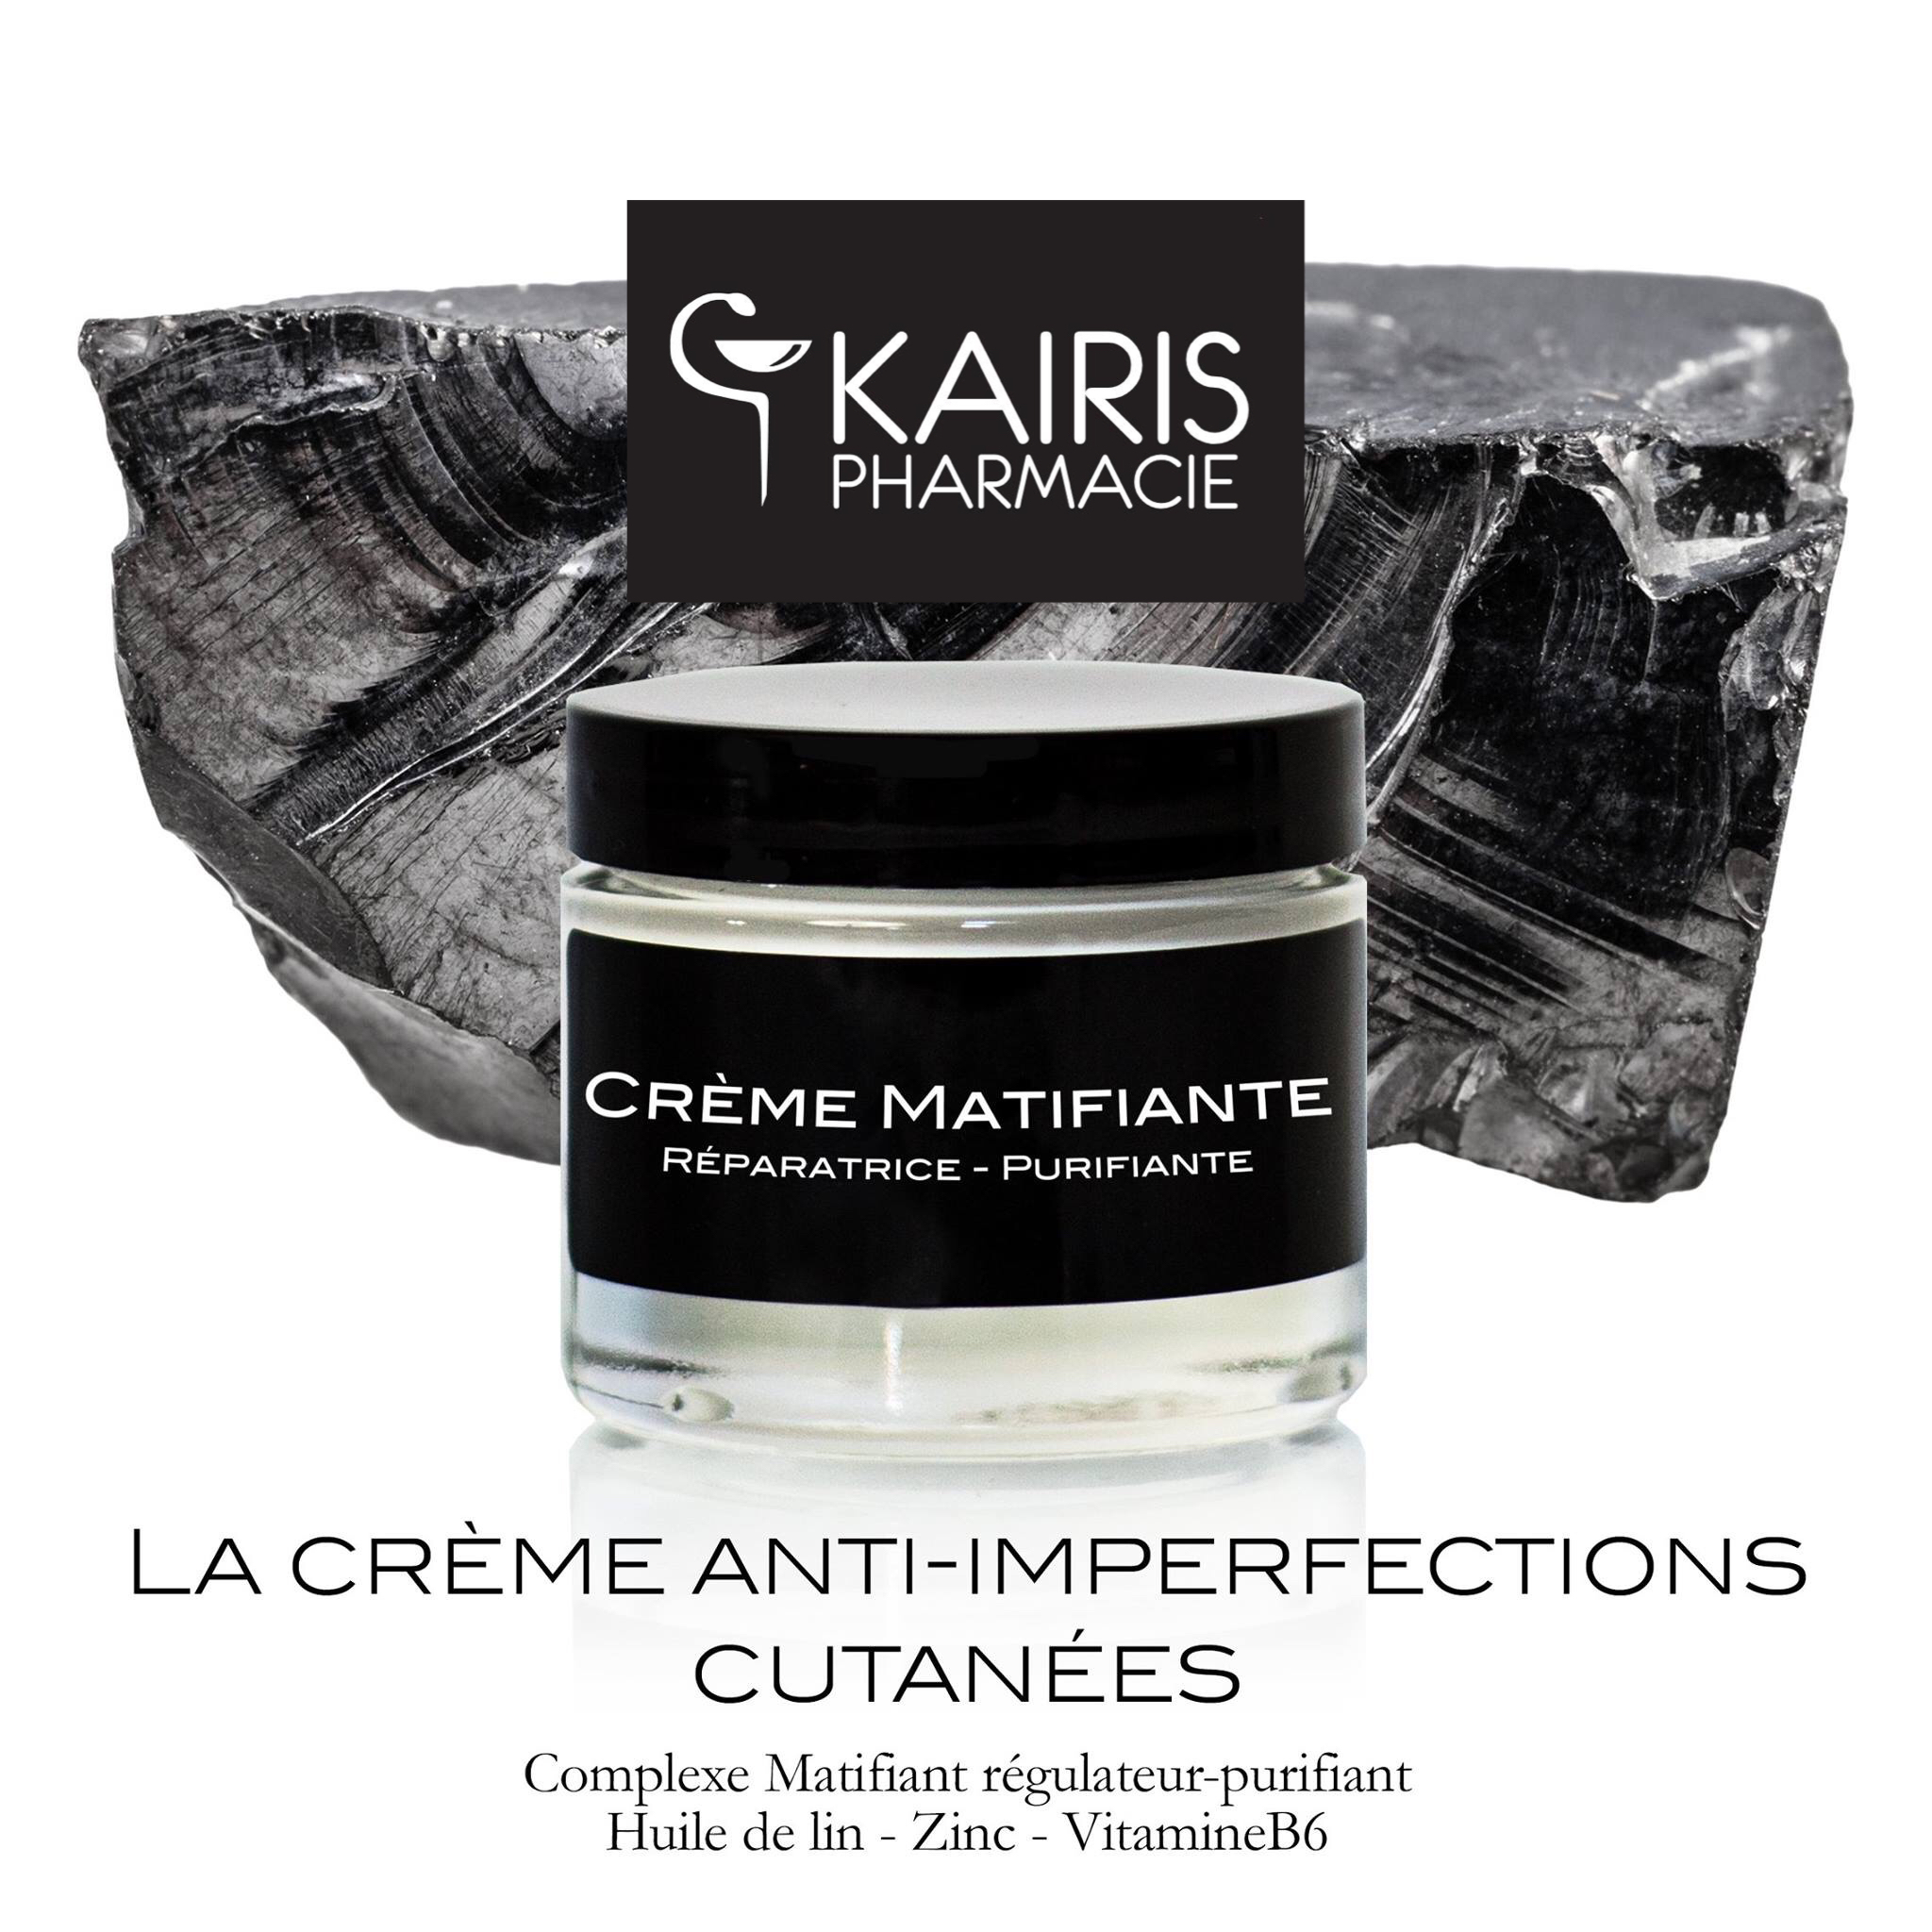 You are currently viewing La crème anti-imperfections cutanées